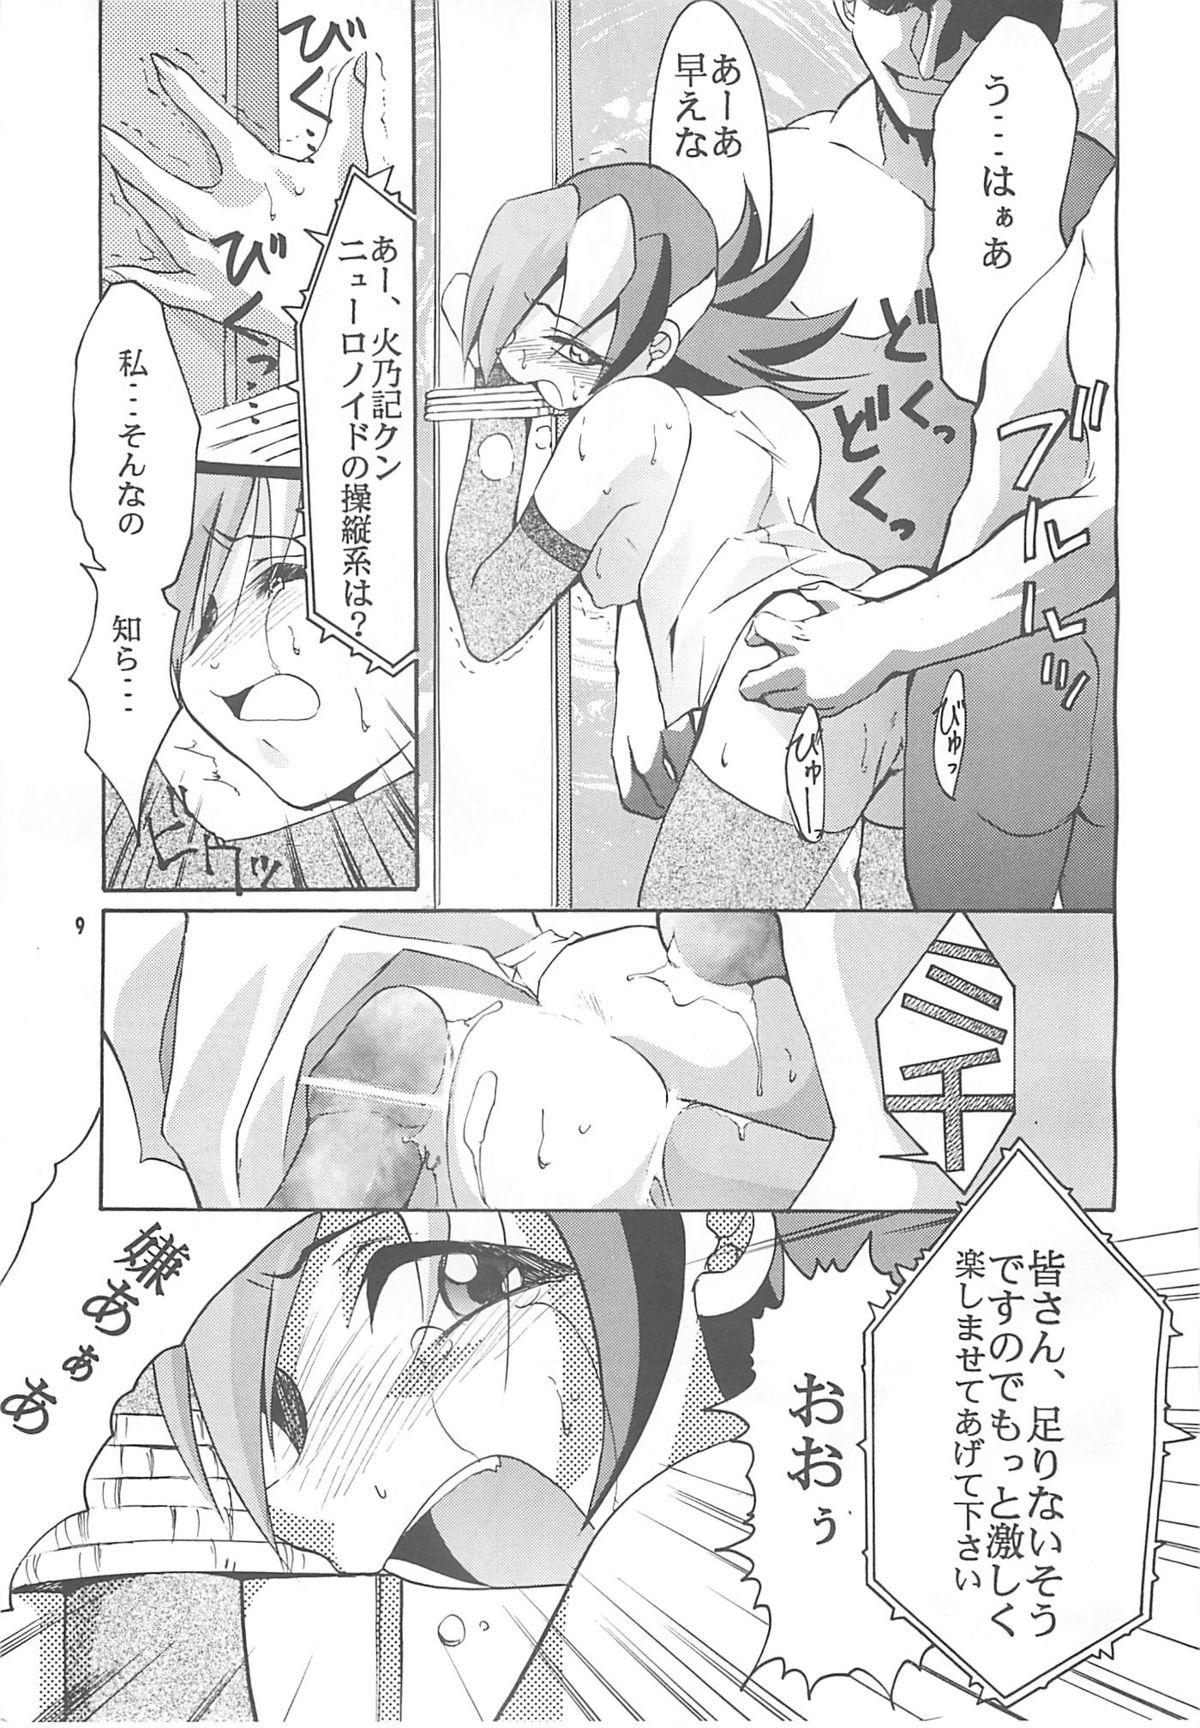 Face TEN - Slayers Saber marionette Betterman Canadian - Page 8